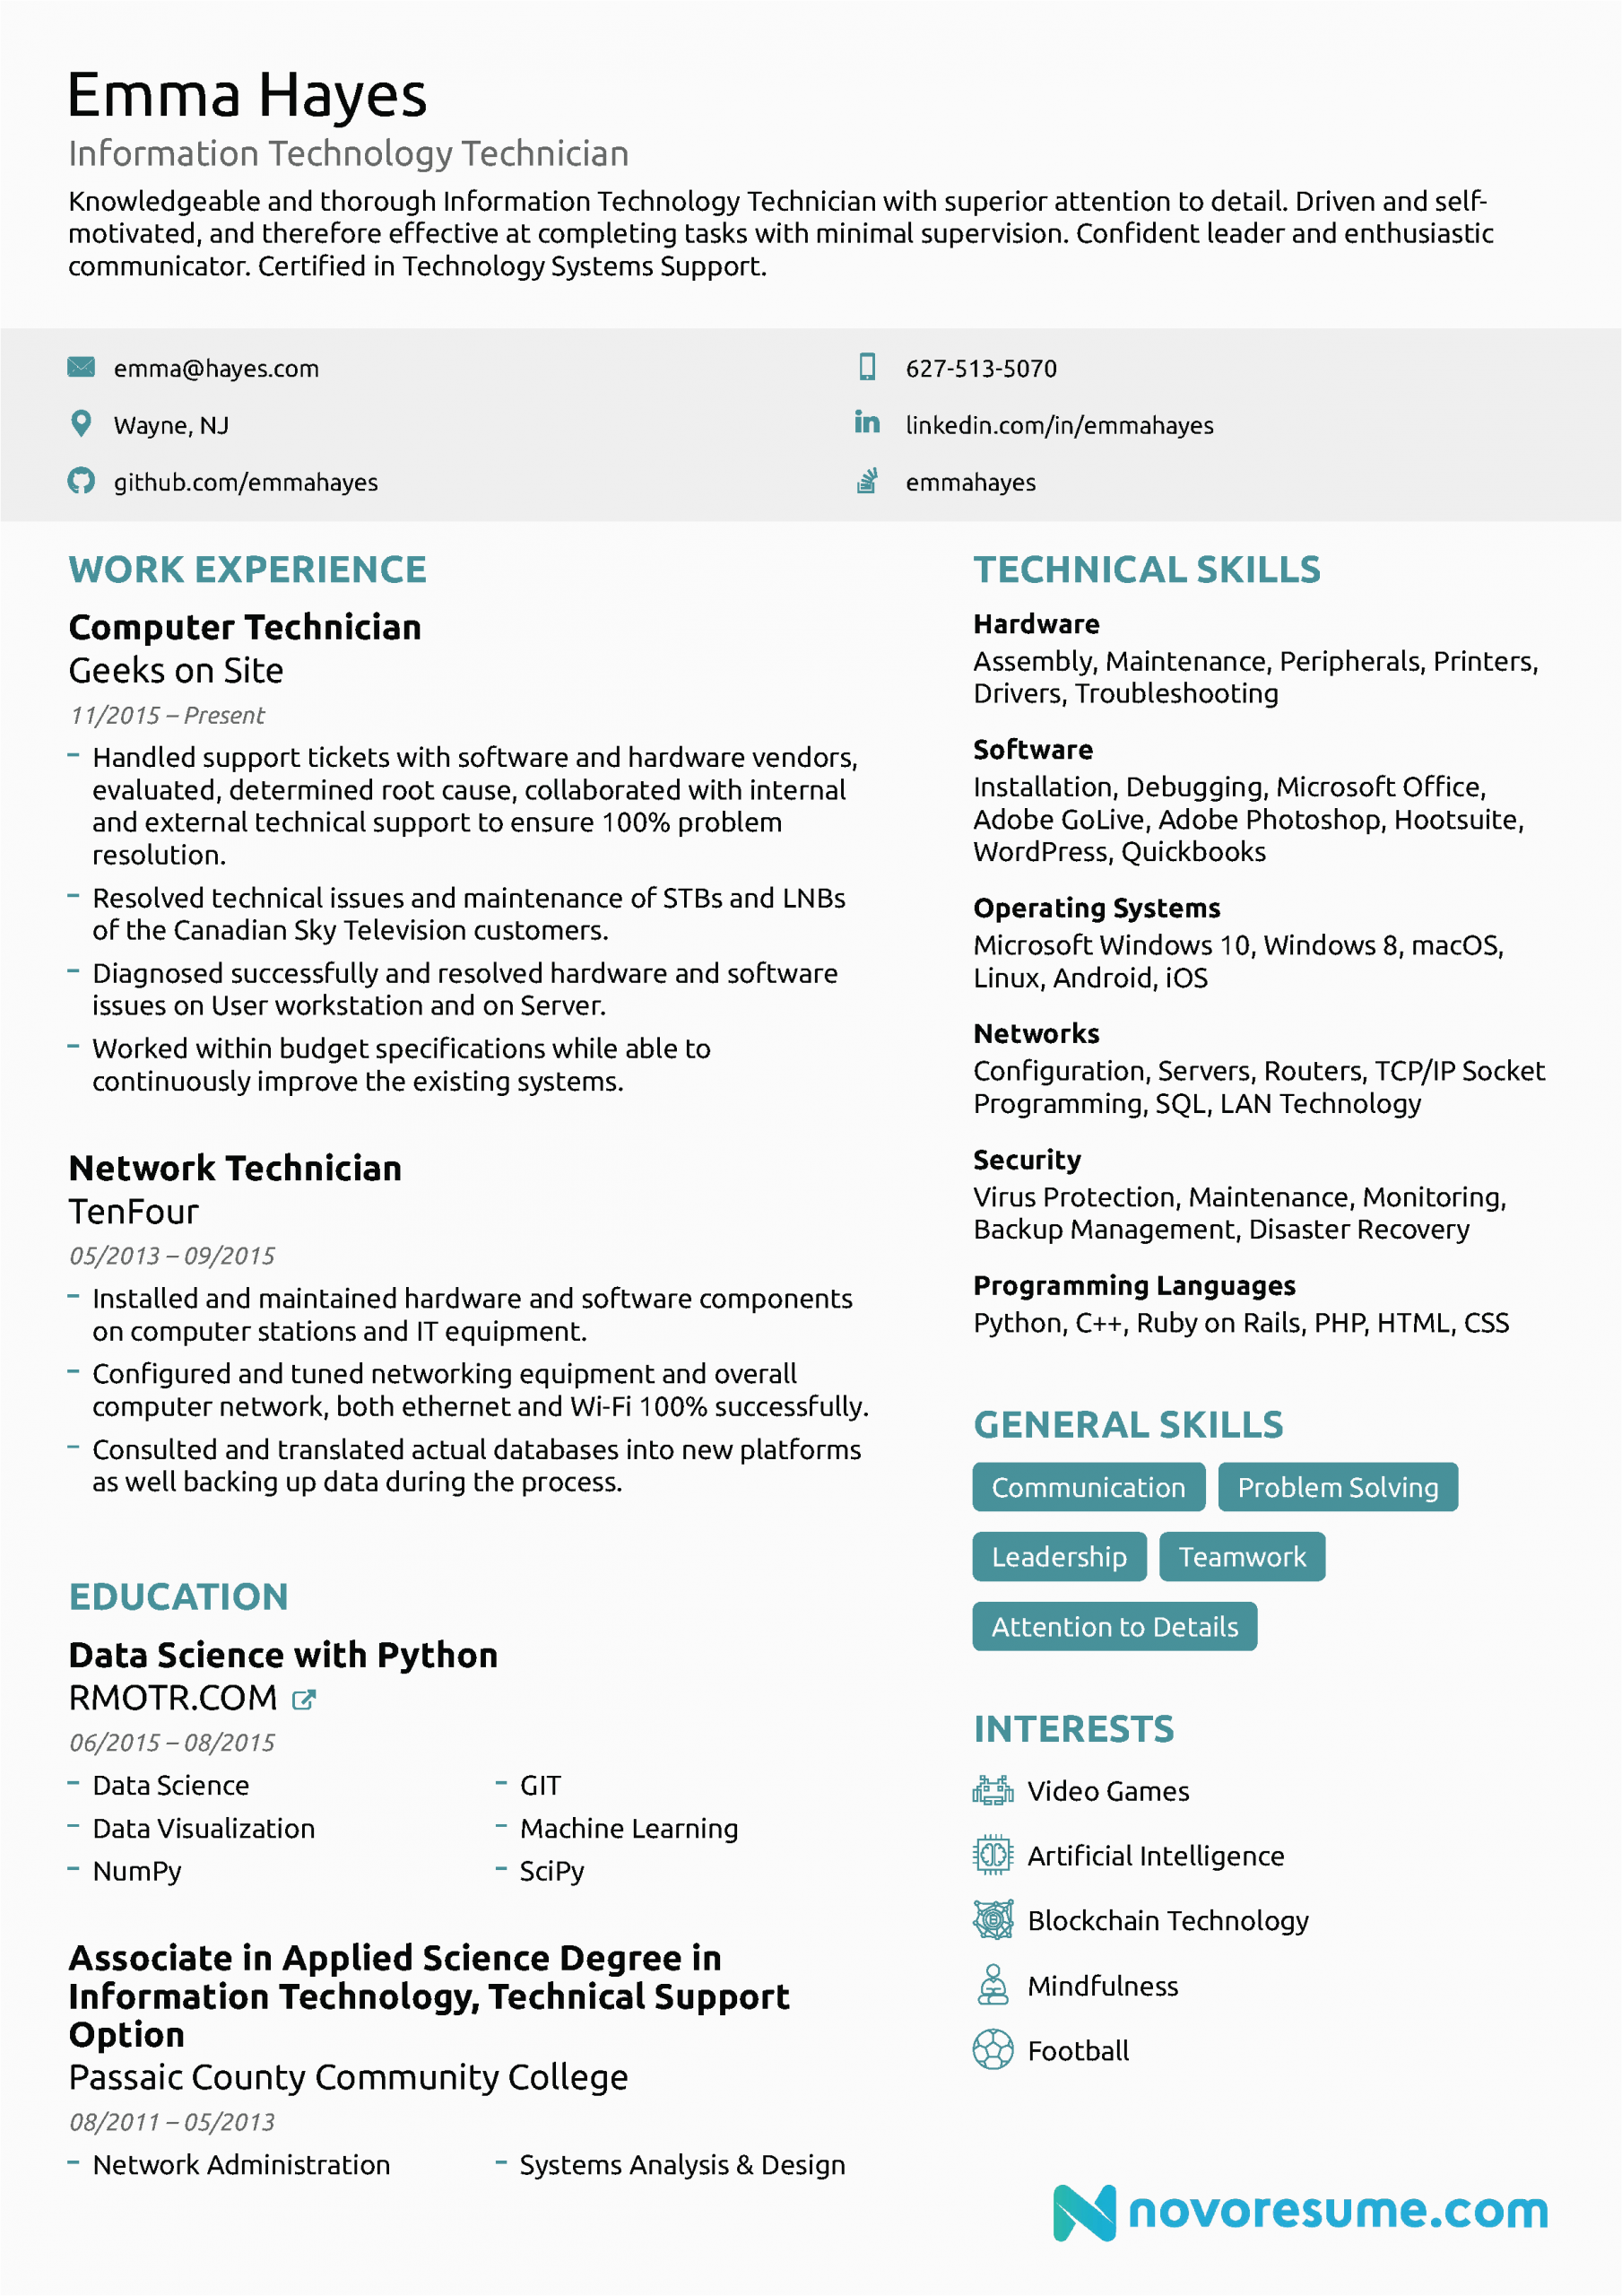 Resume Summary Samples for It Professionals It Resume How to Guide for 2021 [11 Samples]